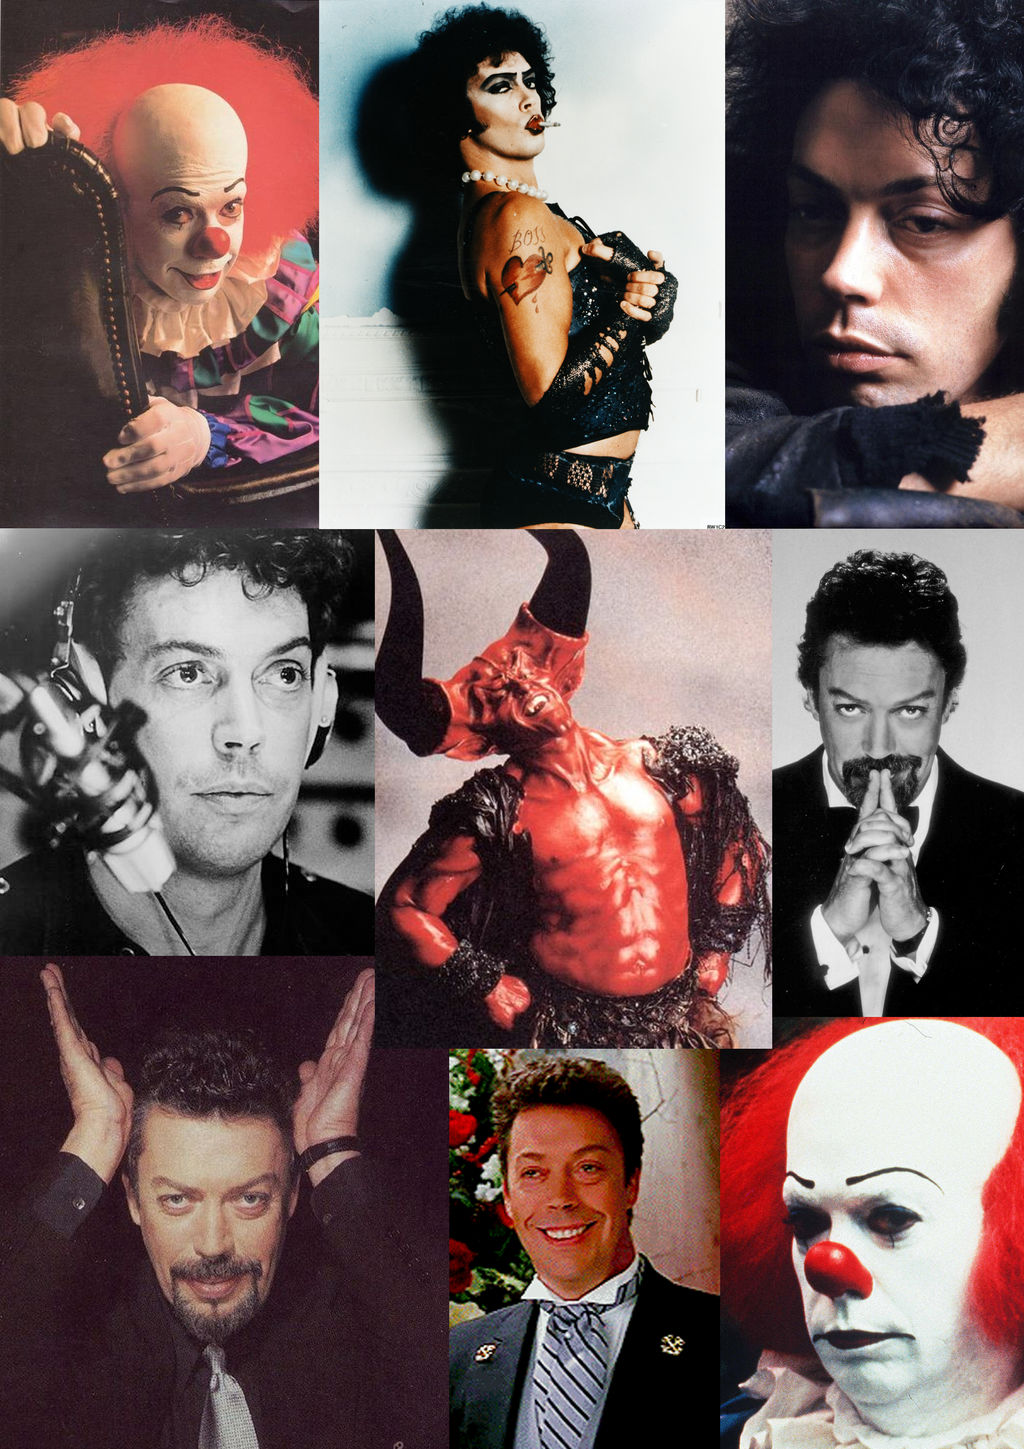 Huge HAPPY BIRTHDAY to the Legend (pun intended) that is Tim Curry!

(It\s my birthday too, but whatever...) 